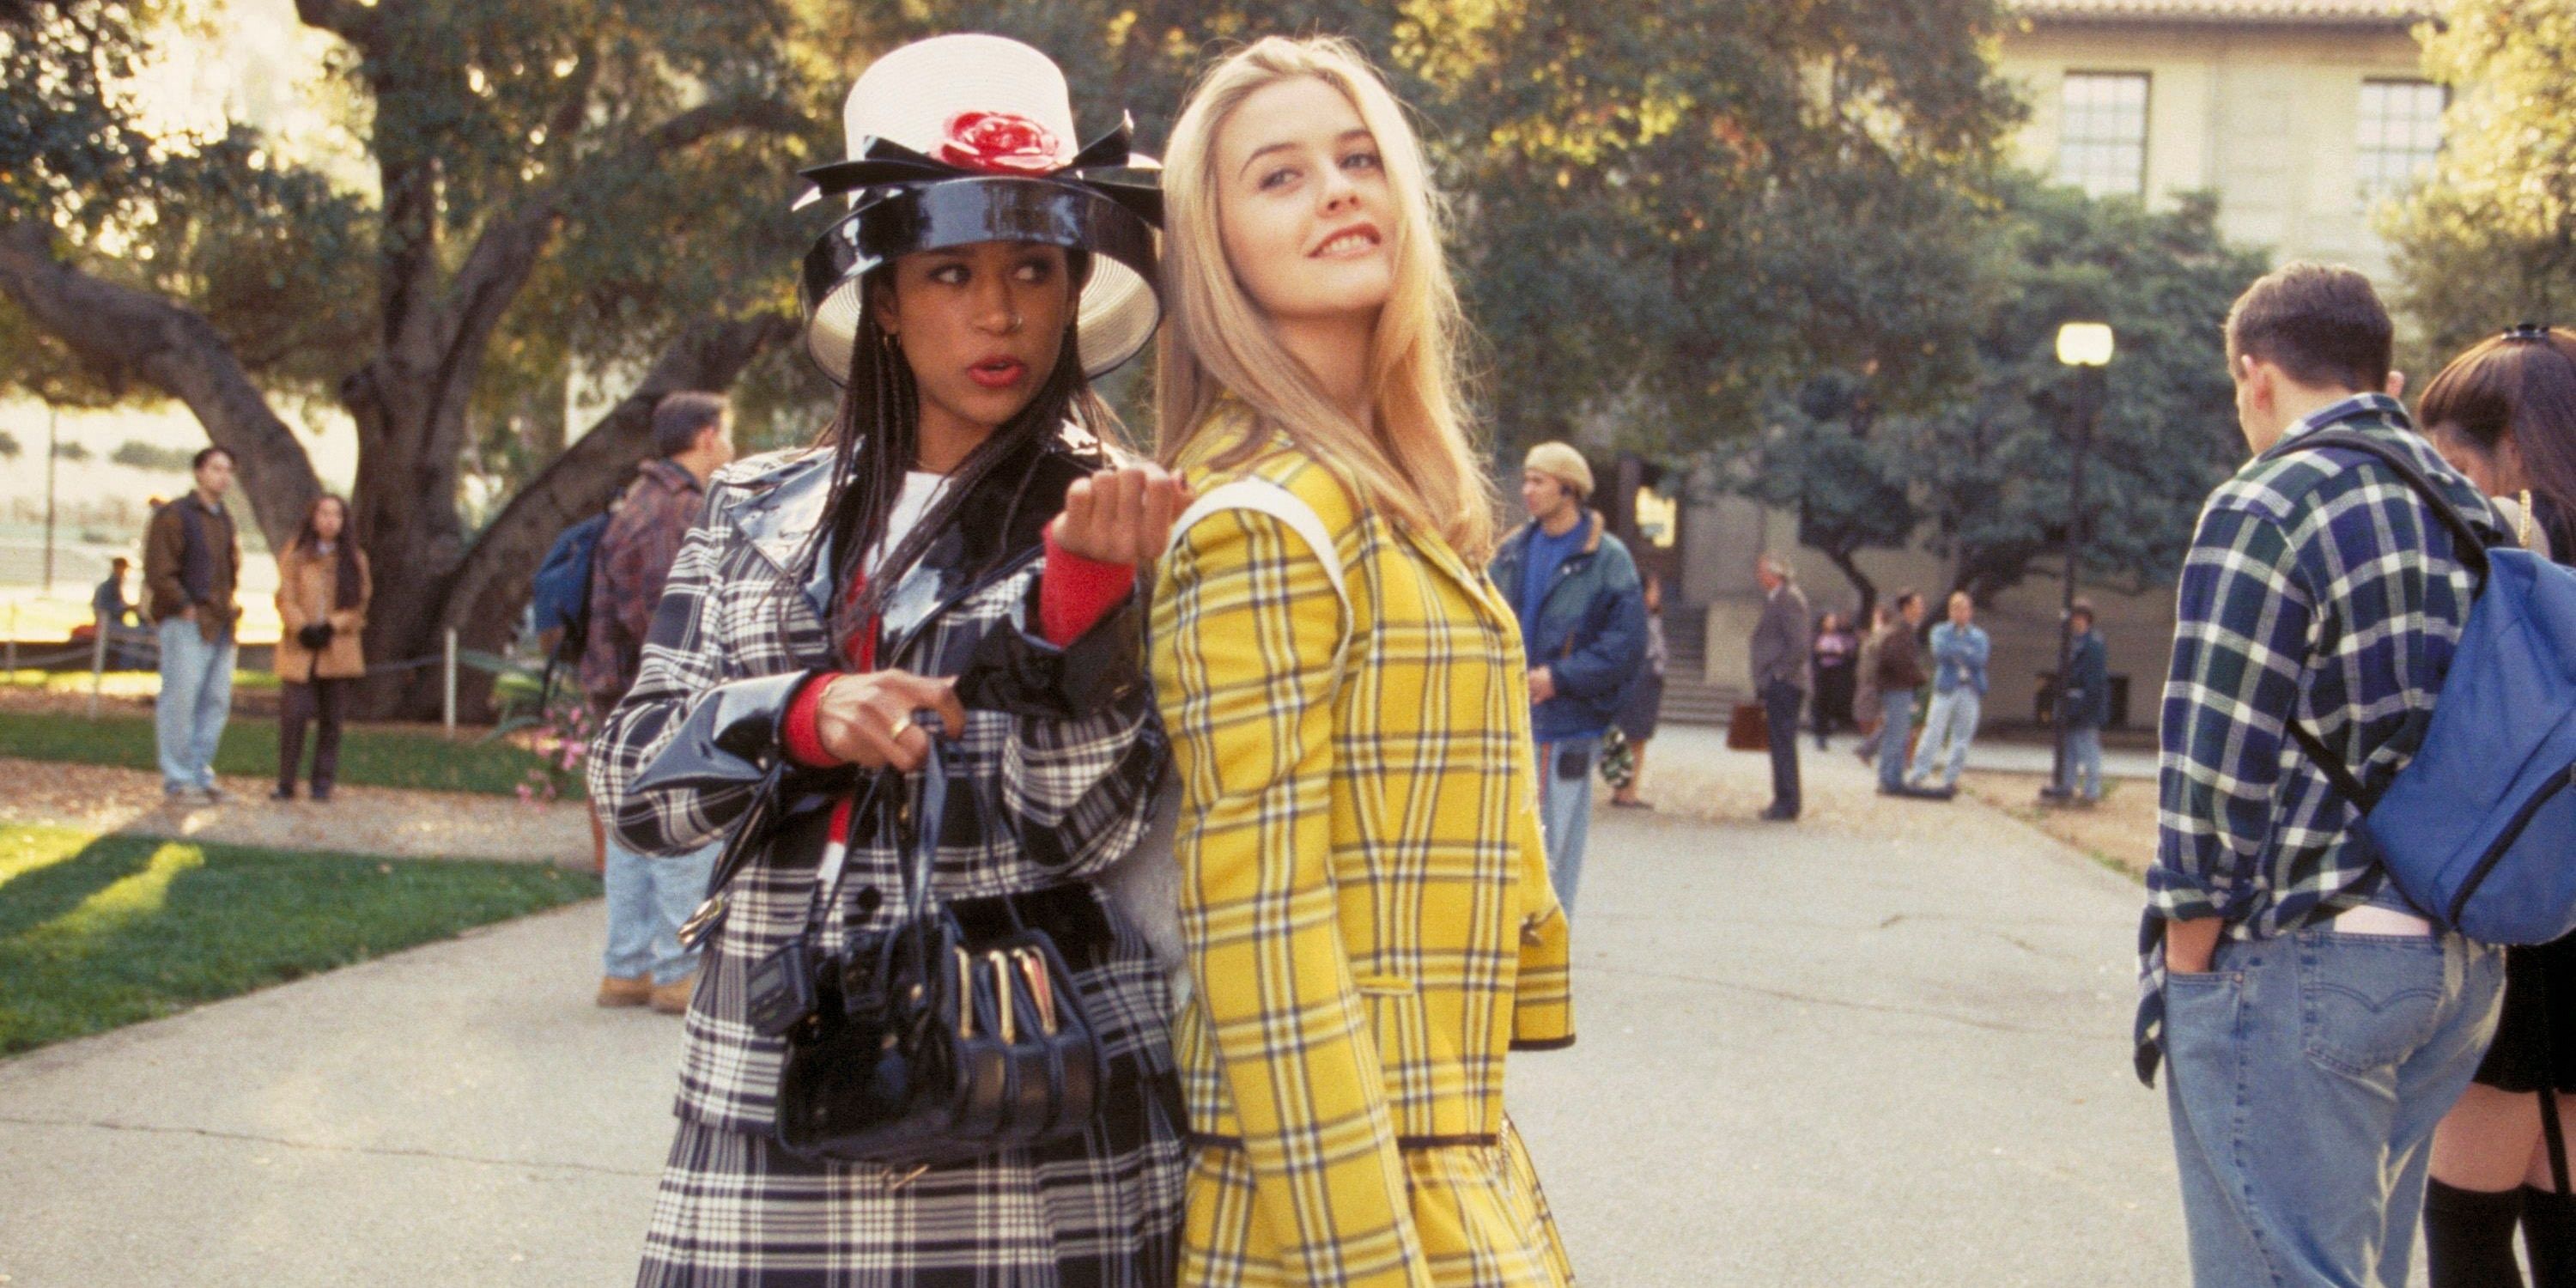 Cher (Alicia Silverstone) and Dionne (Stacey Nash) in their plaid suits in Clueless